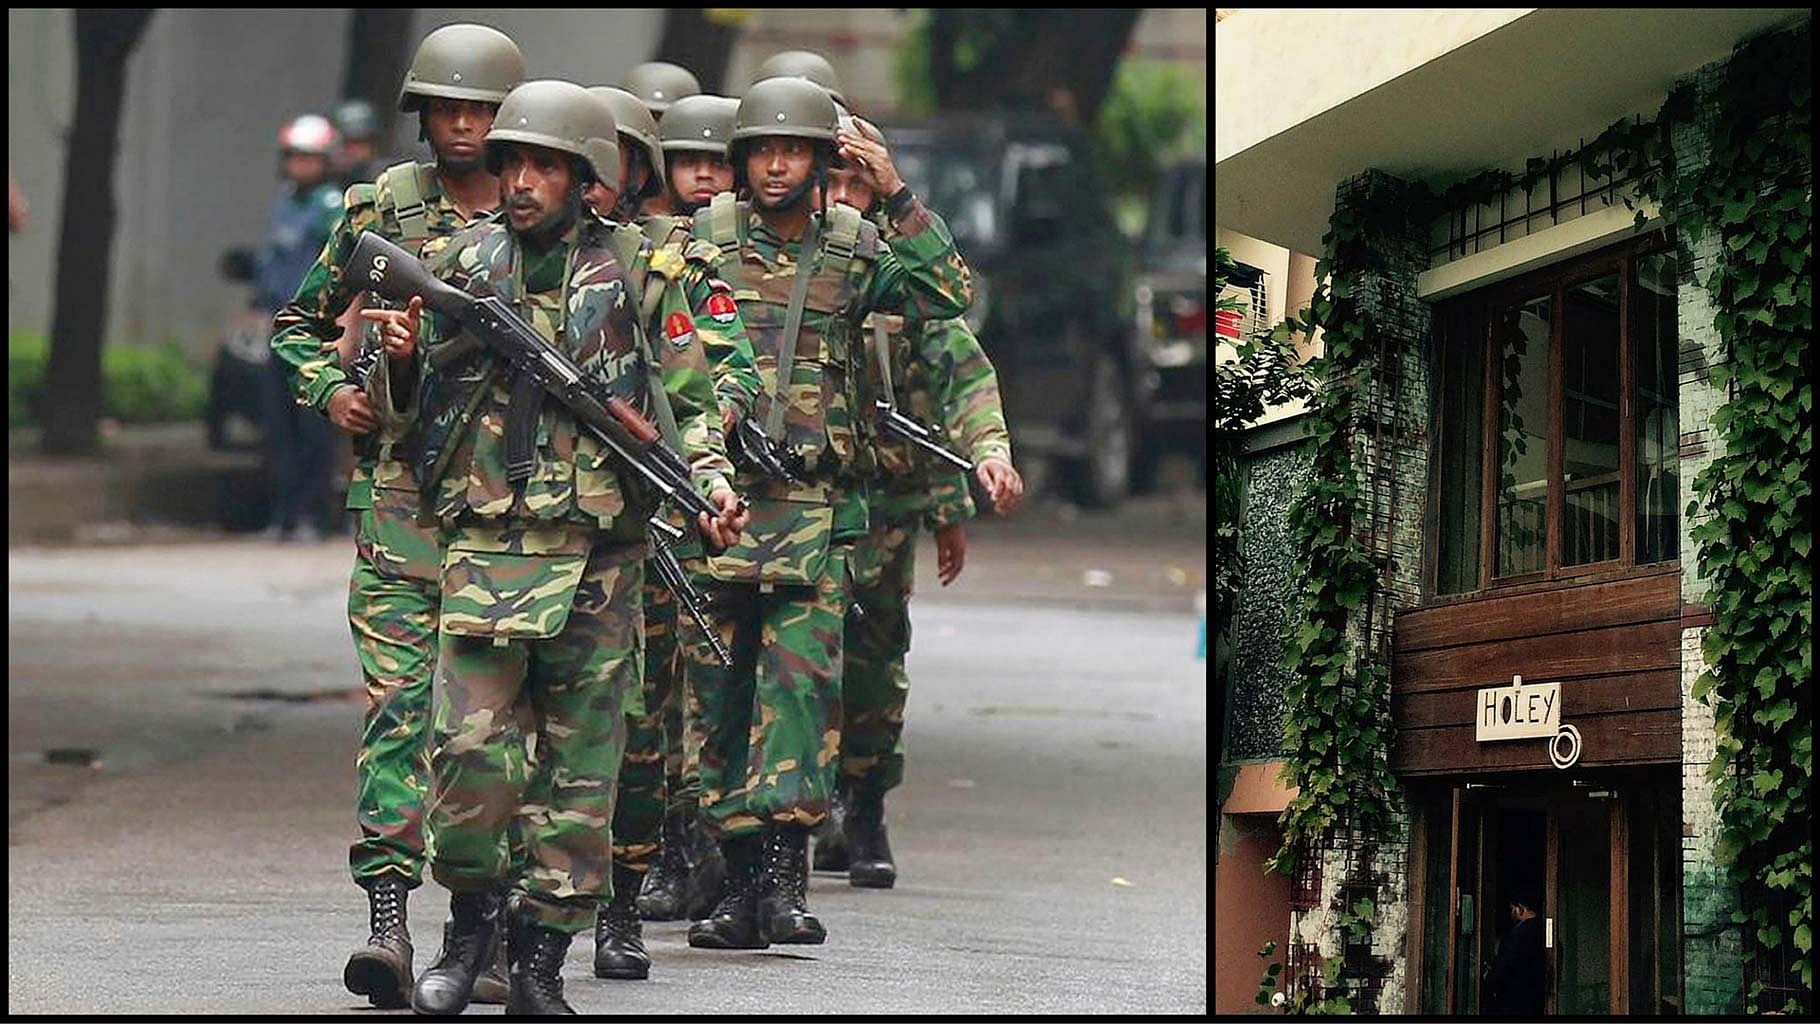 Bangladeshi soldiers (left) walk out of the Holey Artisan Bakery (right) which came under terrorist attack on Friday, 1 July 2016. (Photo: <b>The Quint</b>)